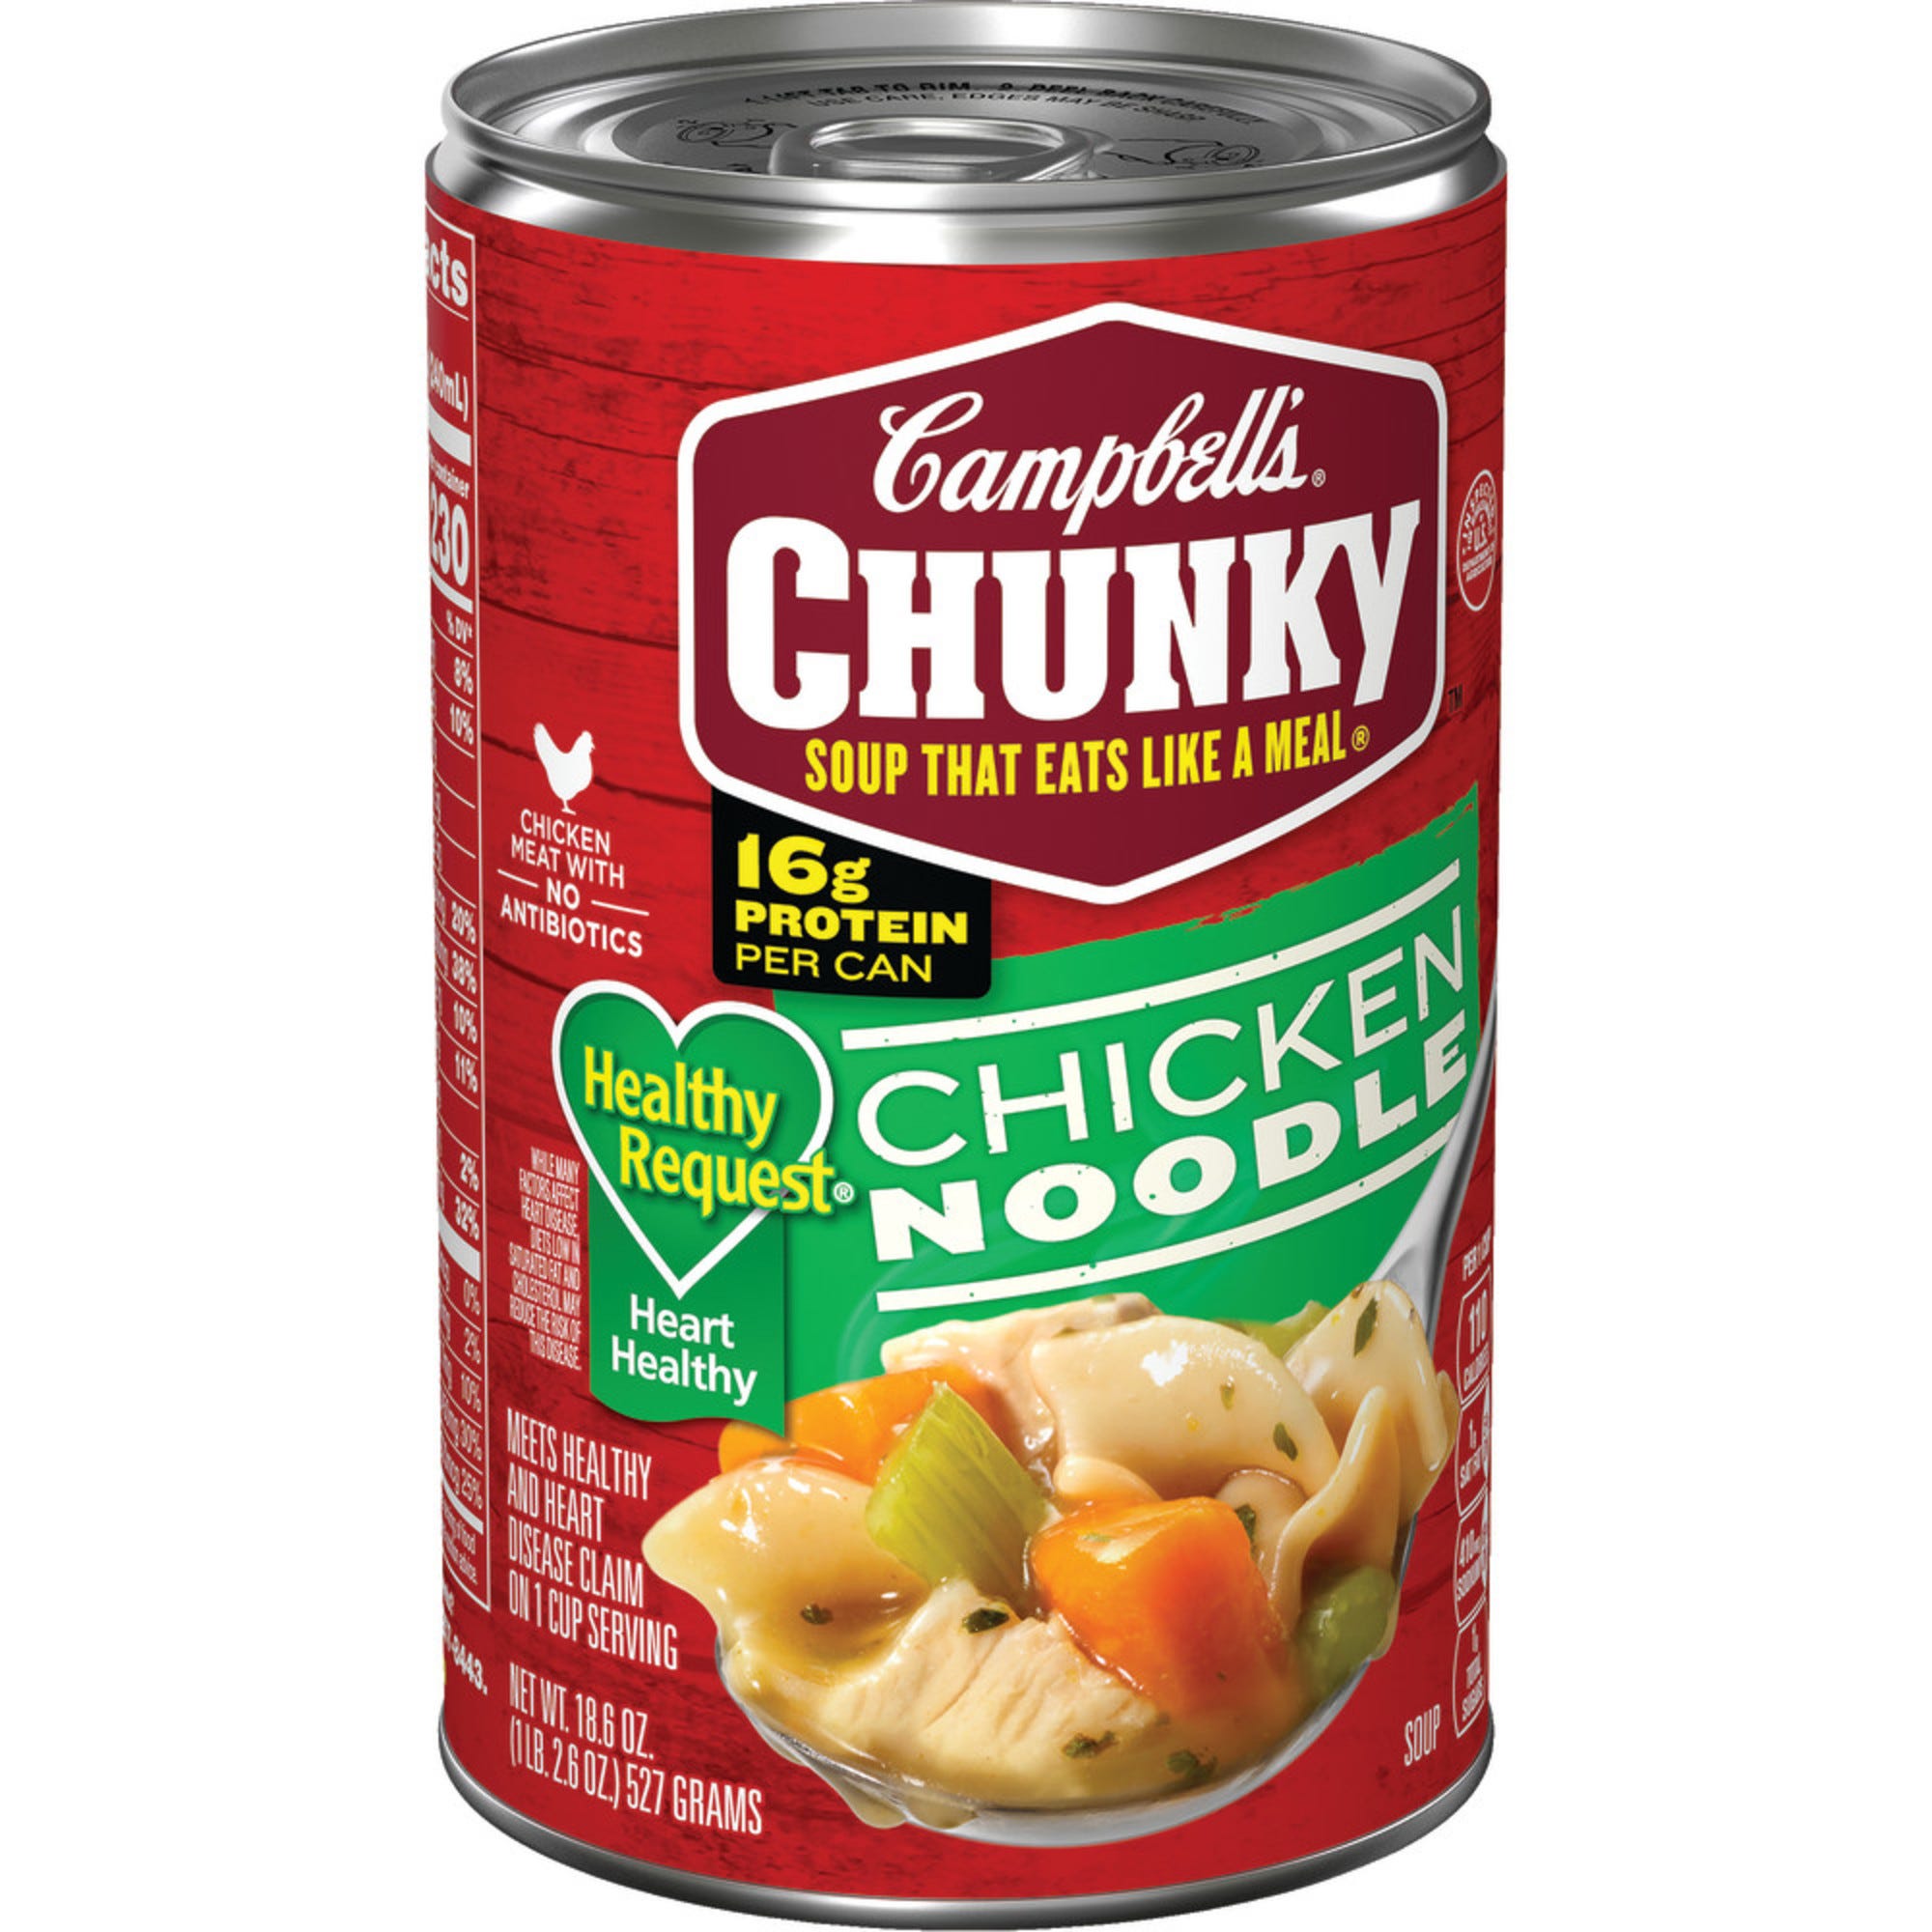 Campbell's Chunky Soup, Healthy Request Chicken Noodle Soup - 18.6 oz